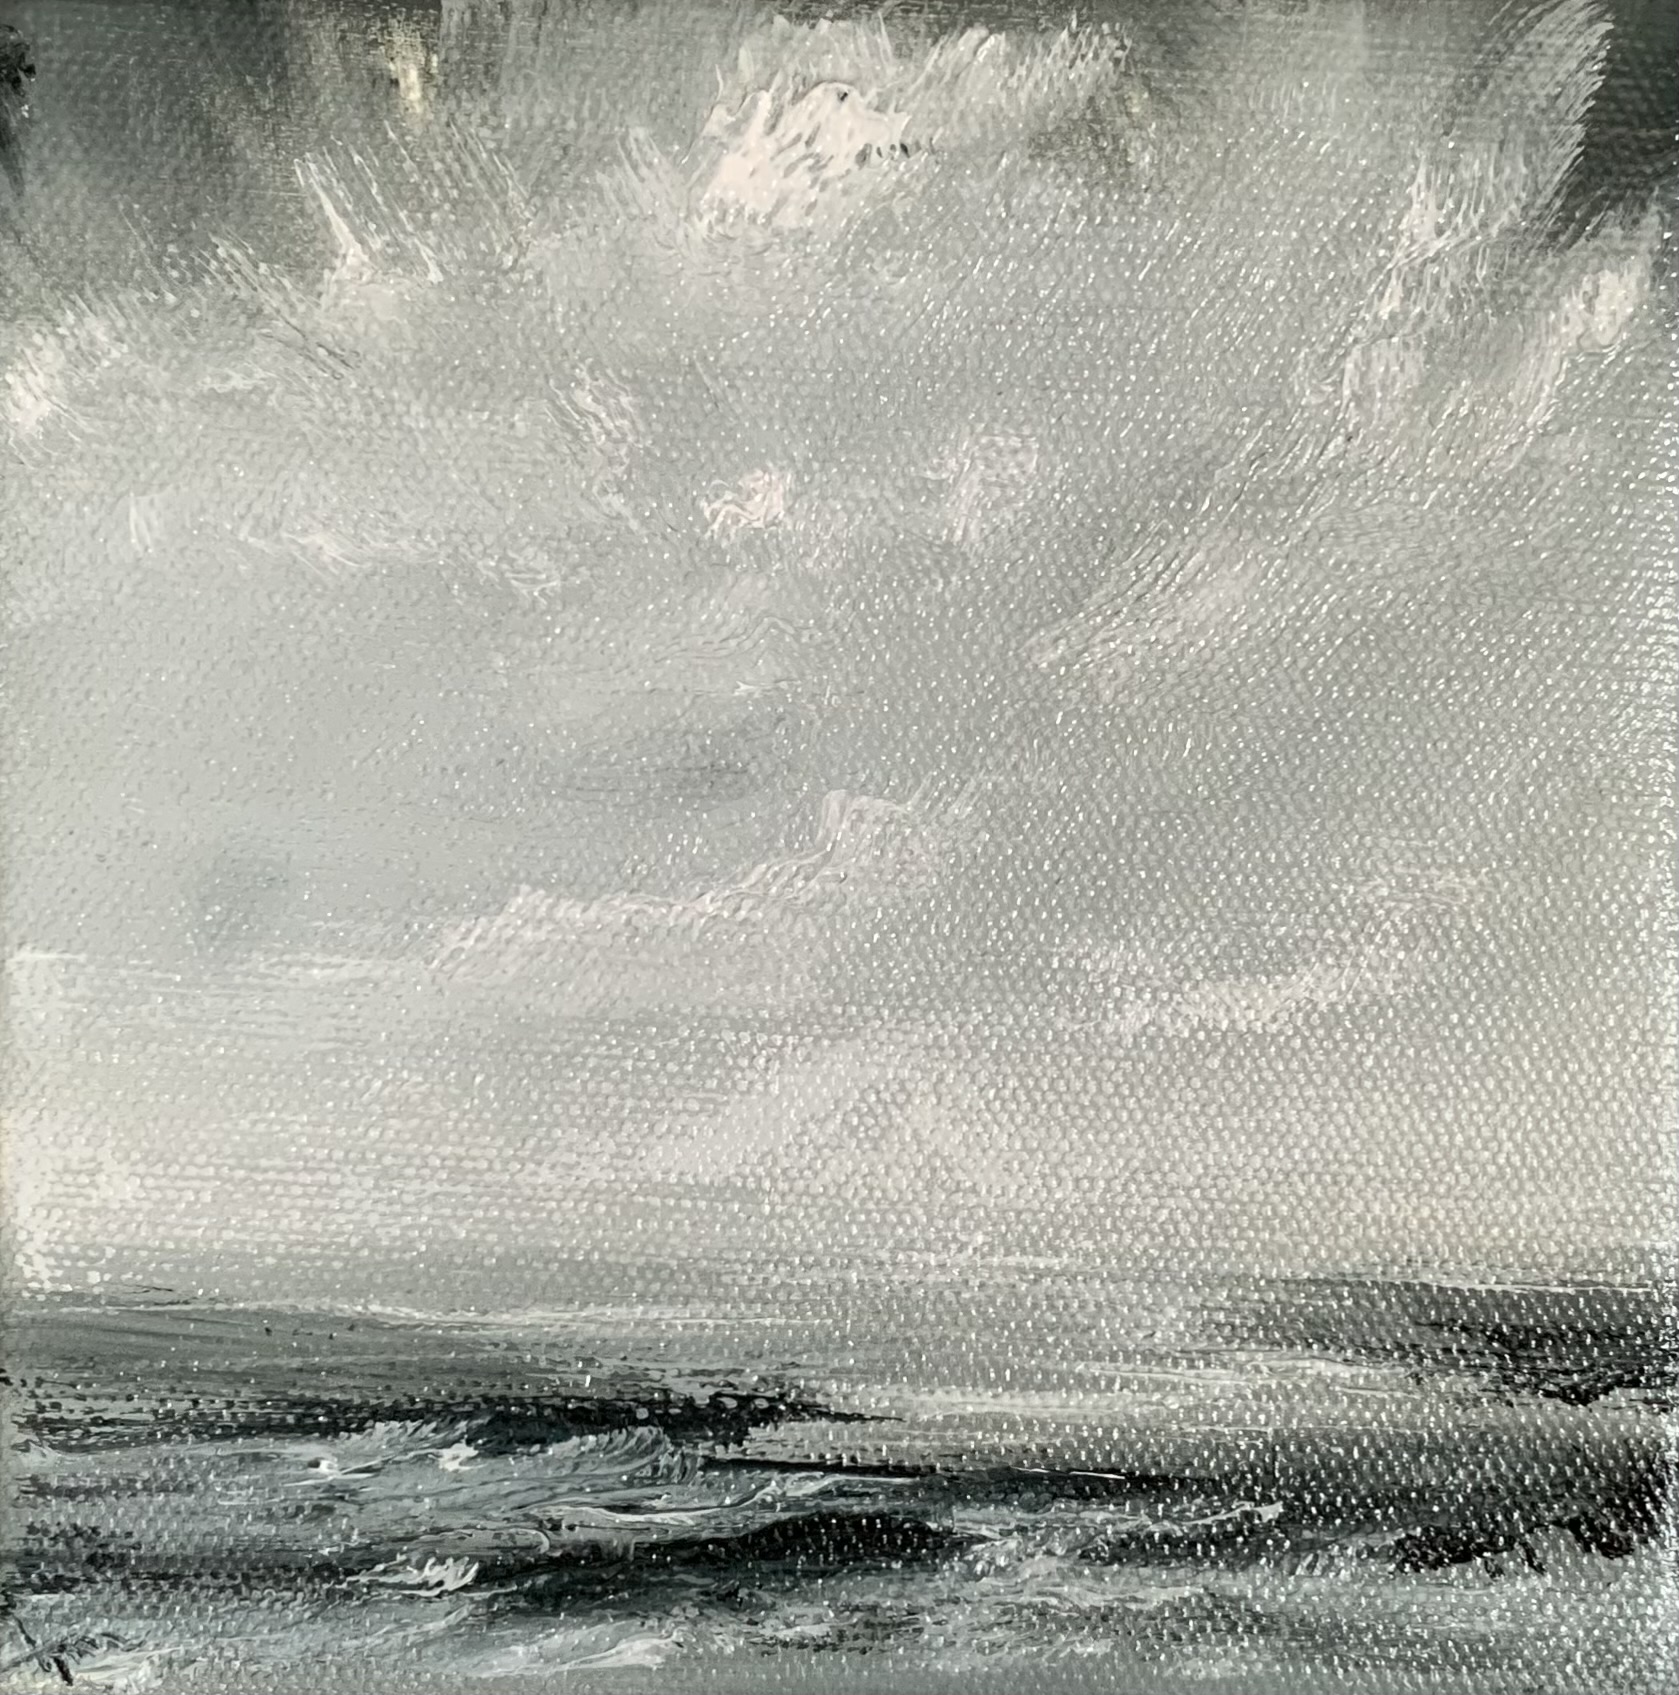 Original seascape oil painting by Tisha Mark, "Wintry Seas No. 5" 6"x6" oil on canvas (2024). Wintertime sea and sky, painted in a limited palette of grays, blue, browns, black, and white.